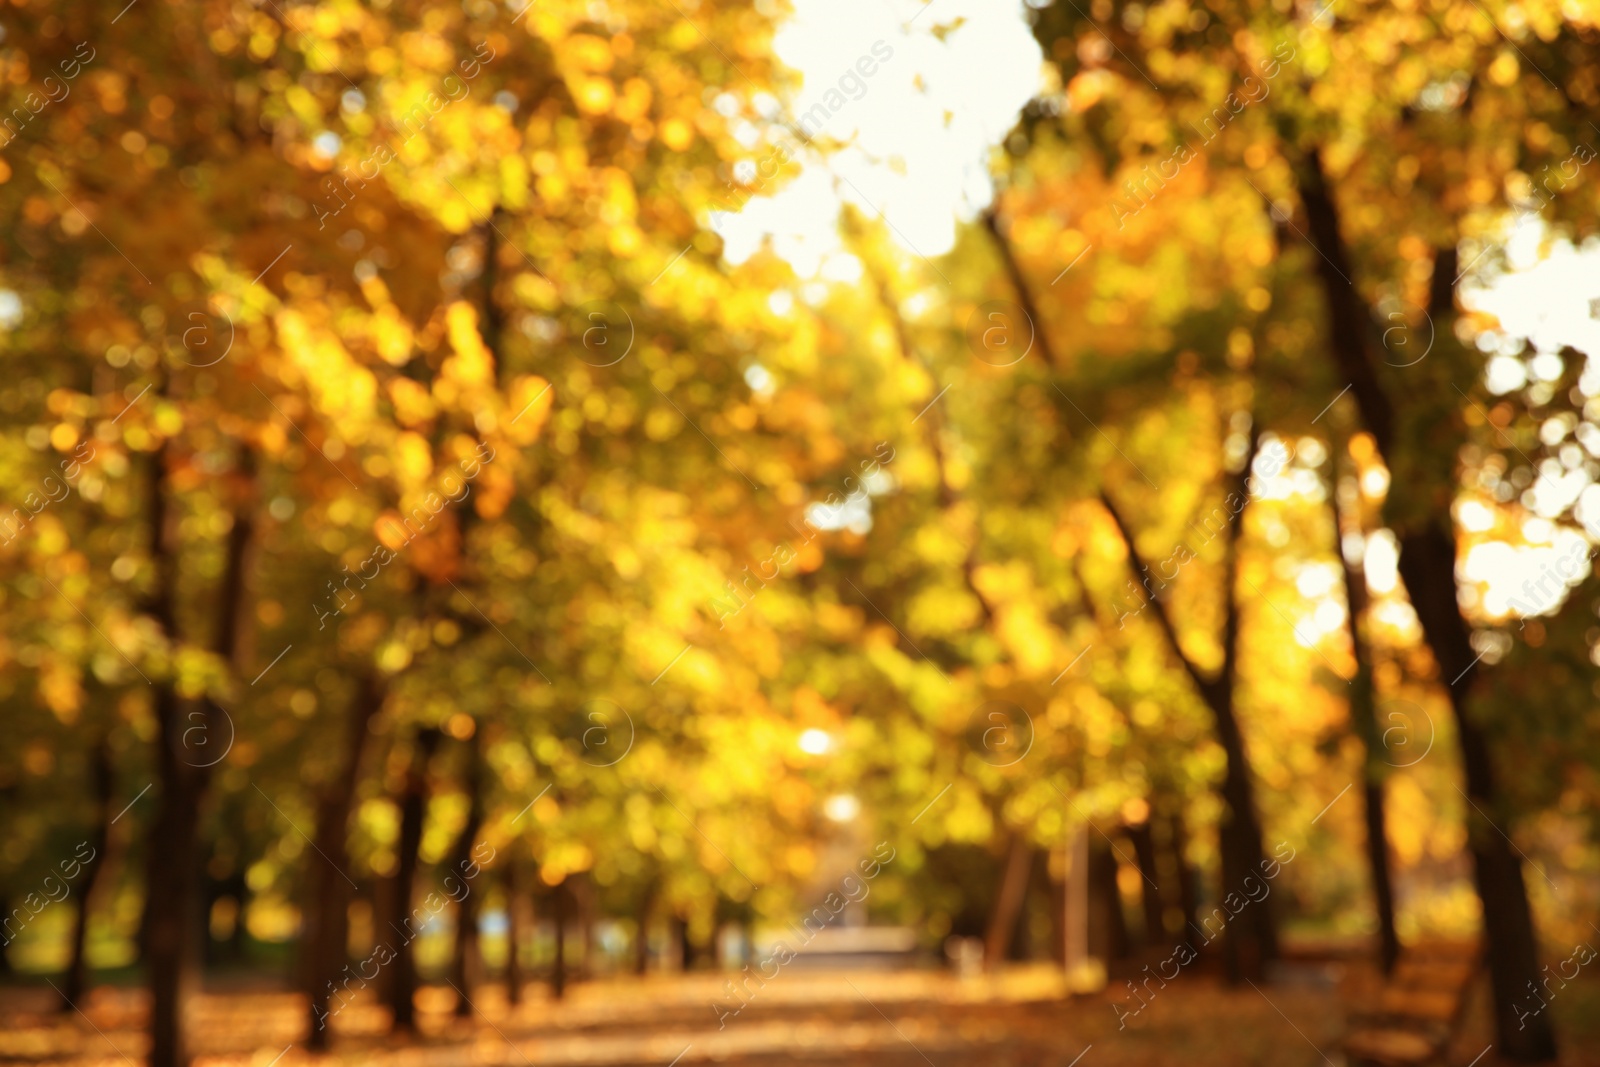 Photo of Blurred view of autumn park with trees and dry leaves on ground